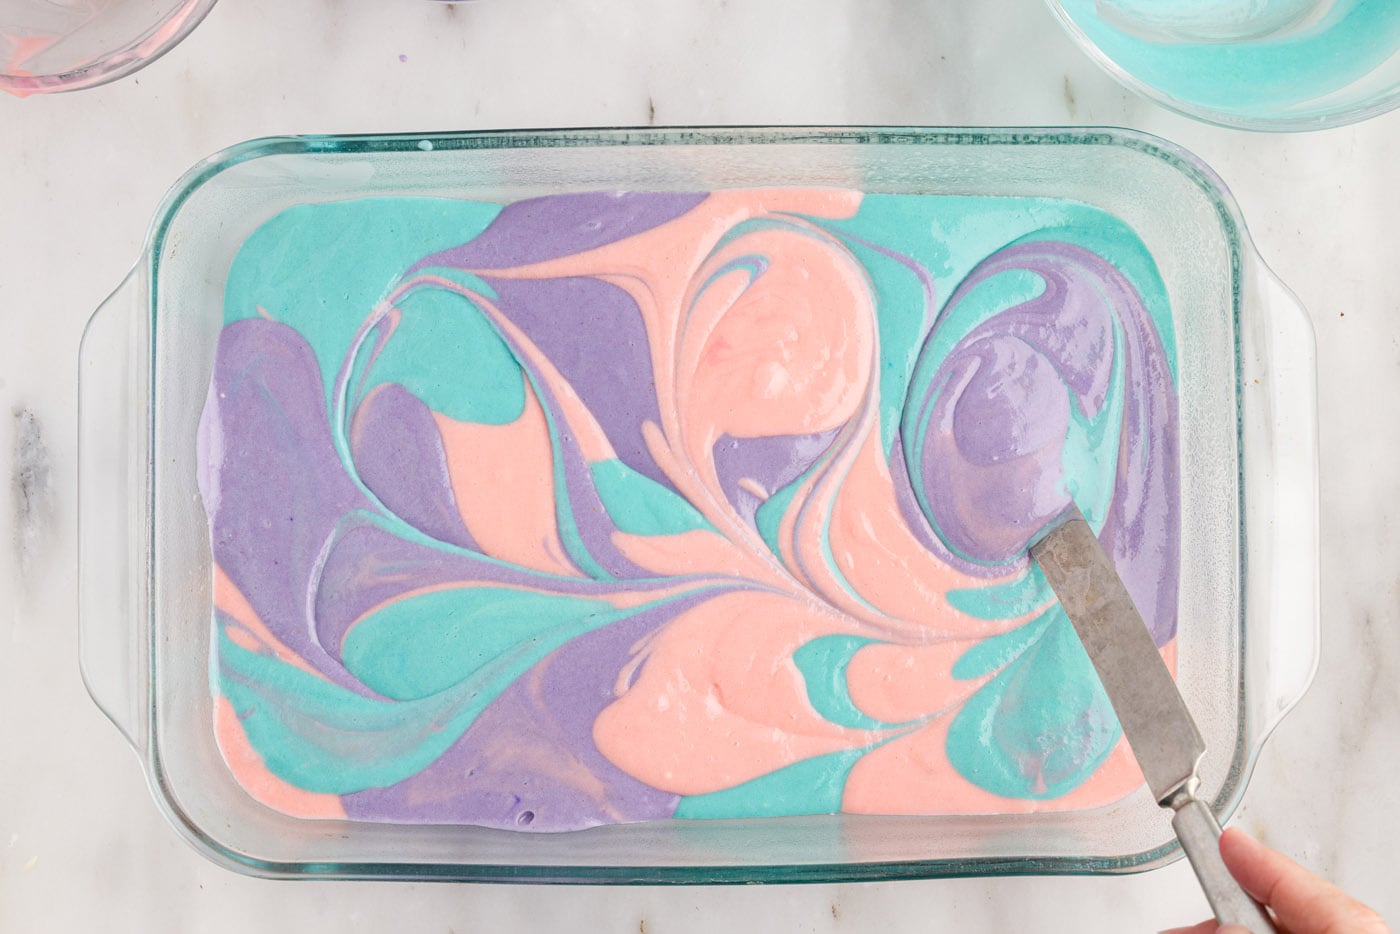 gently swirling colorful cake batter together